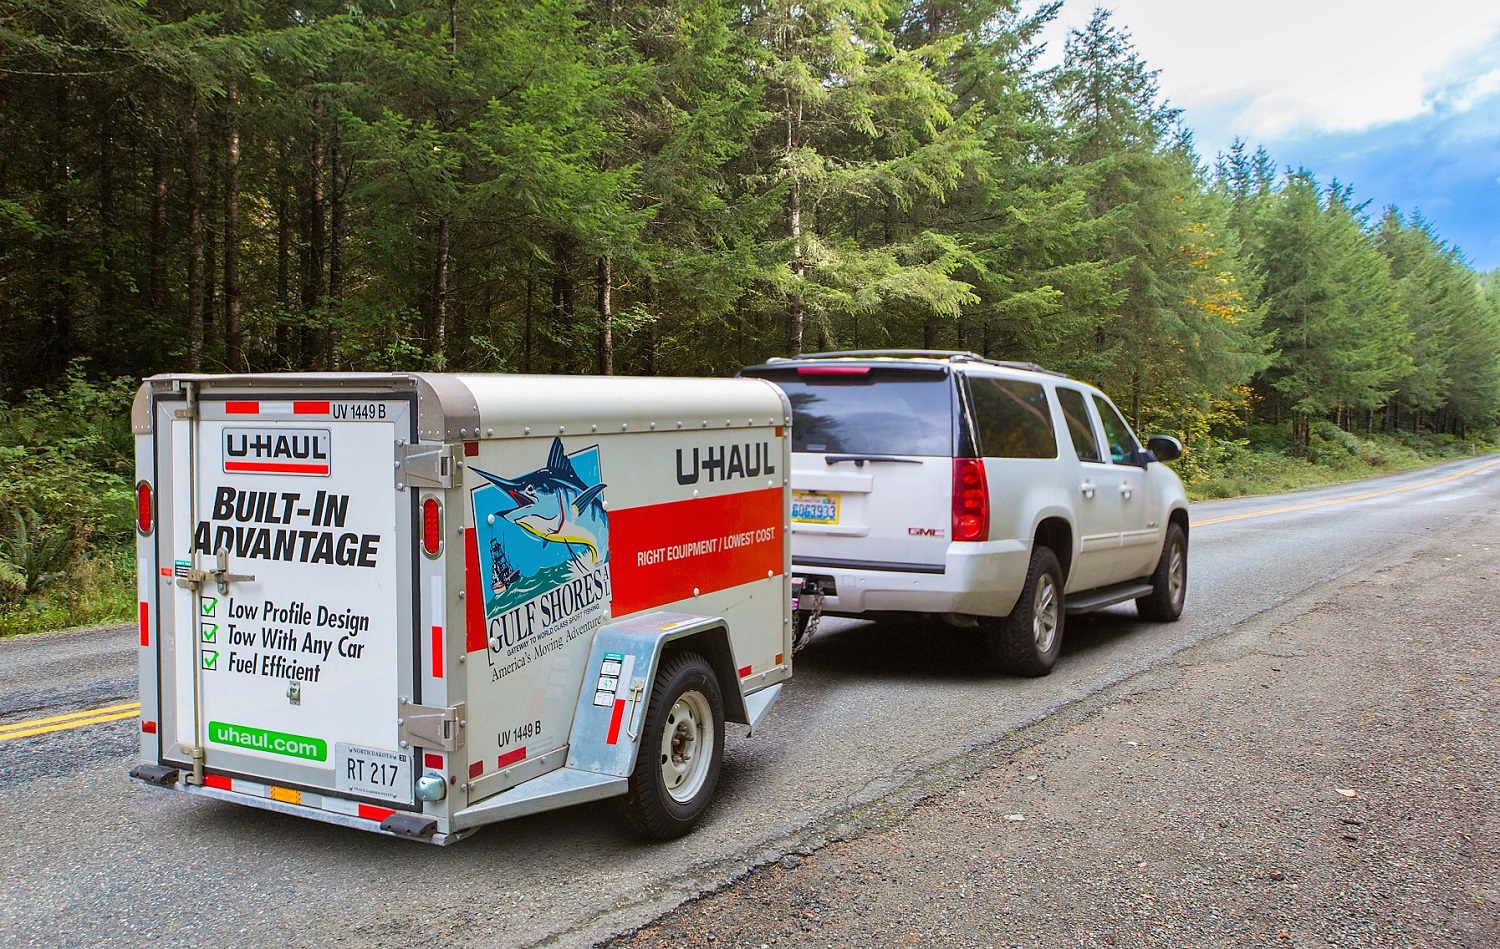 AAMVA Adopts U-Haul Safe Trailering Practices for Driver’s License Manual